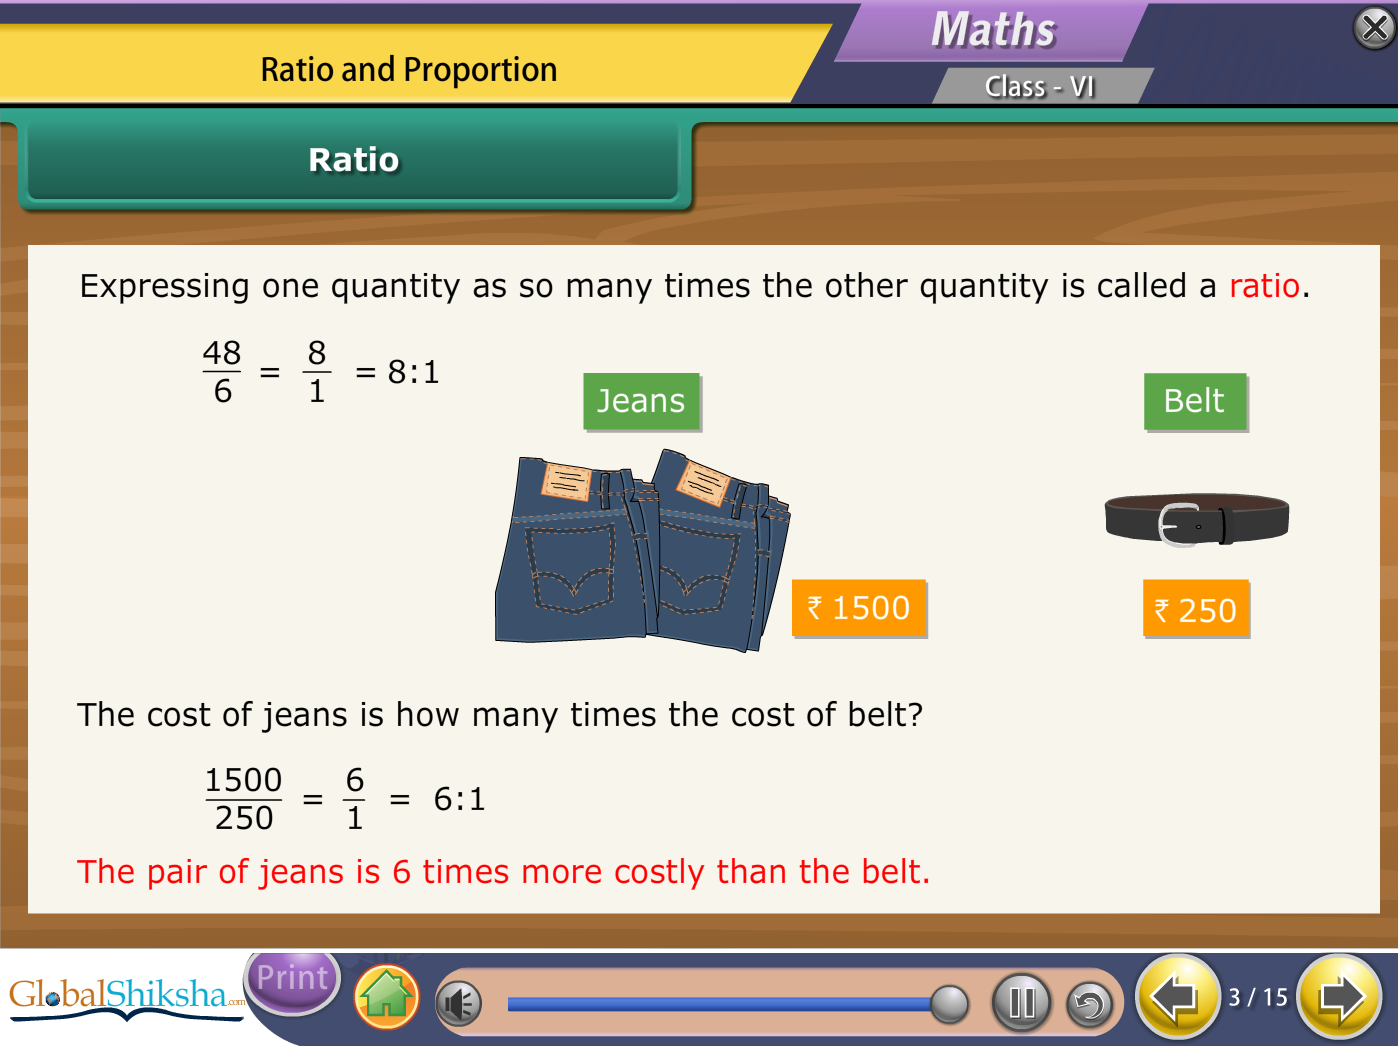 West Bengal State Board Class 6 Maths & Science Animated Pendrive in English